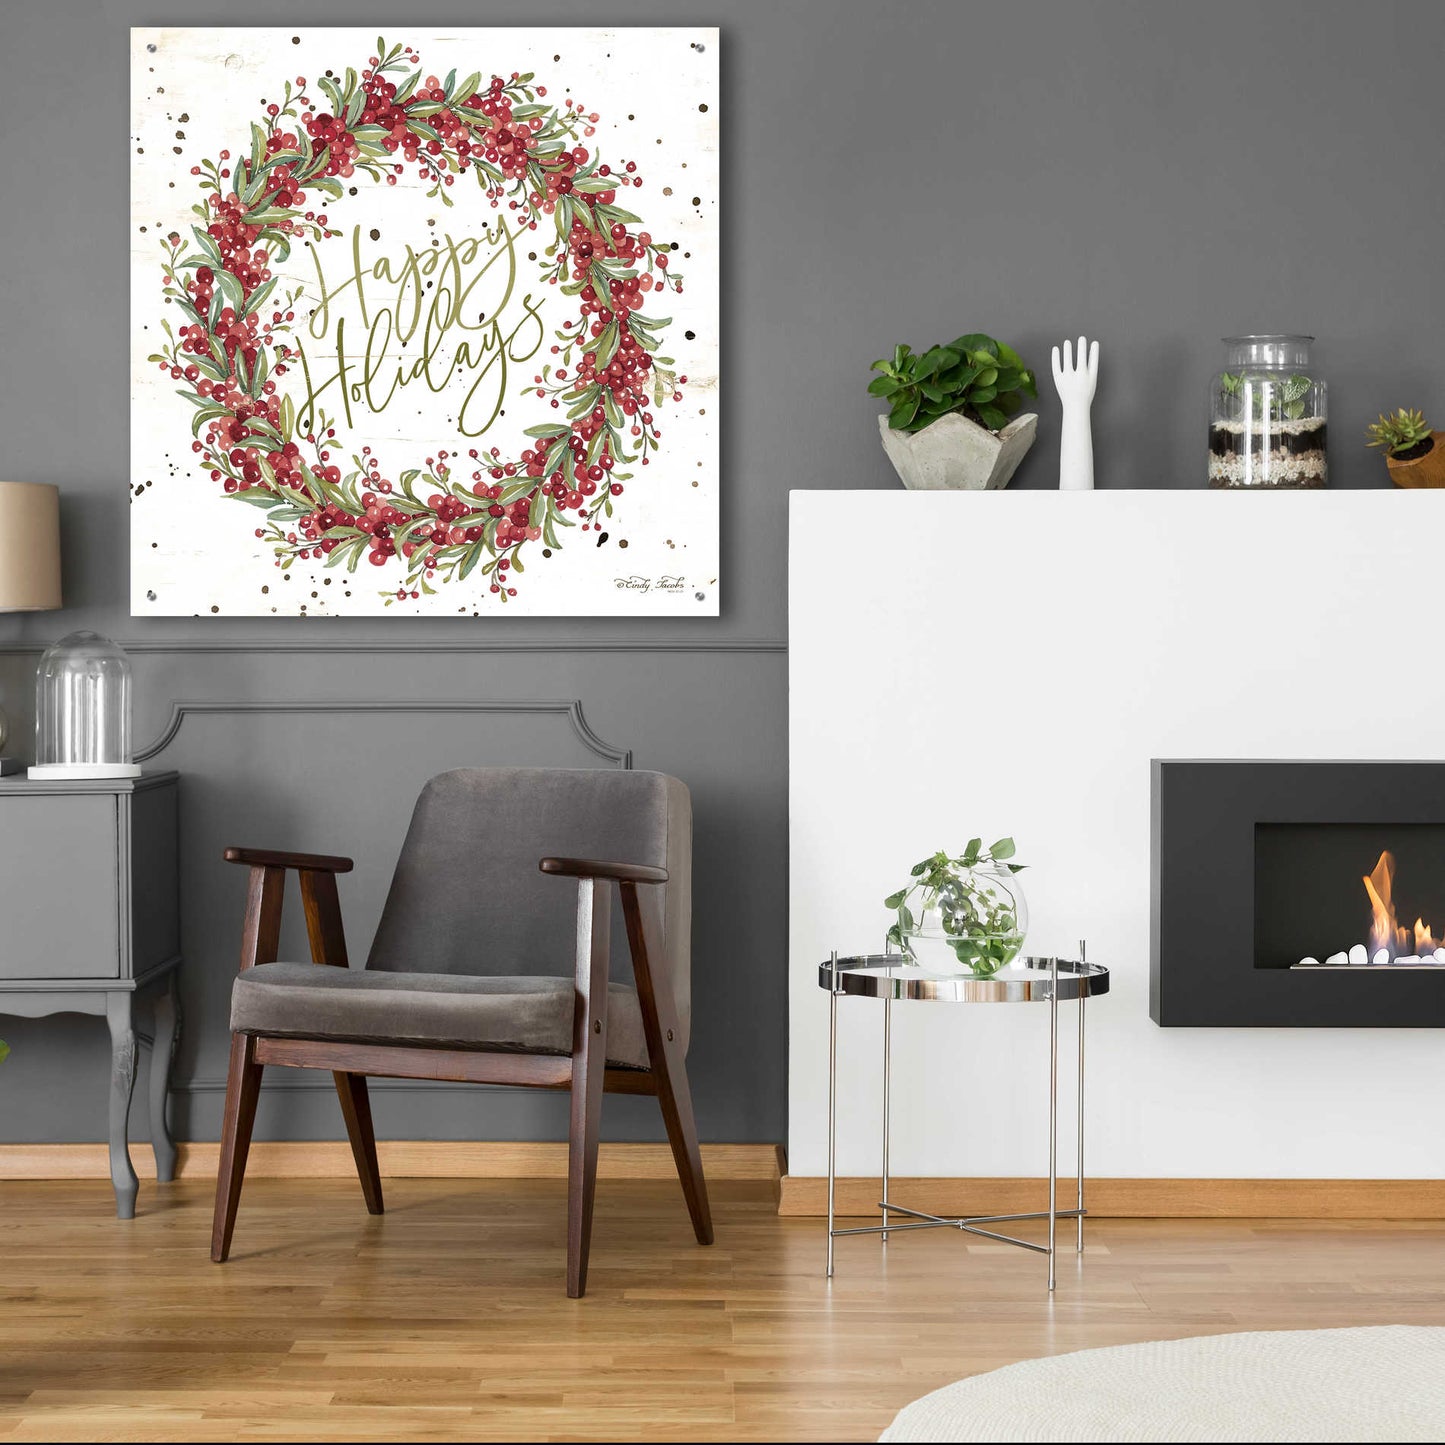 Epic Art 'Happy Holidays Berry Wreath' by Cindy Jacobs, Acrylic Glass Wall Art,36x36